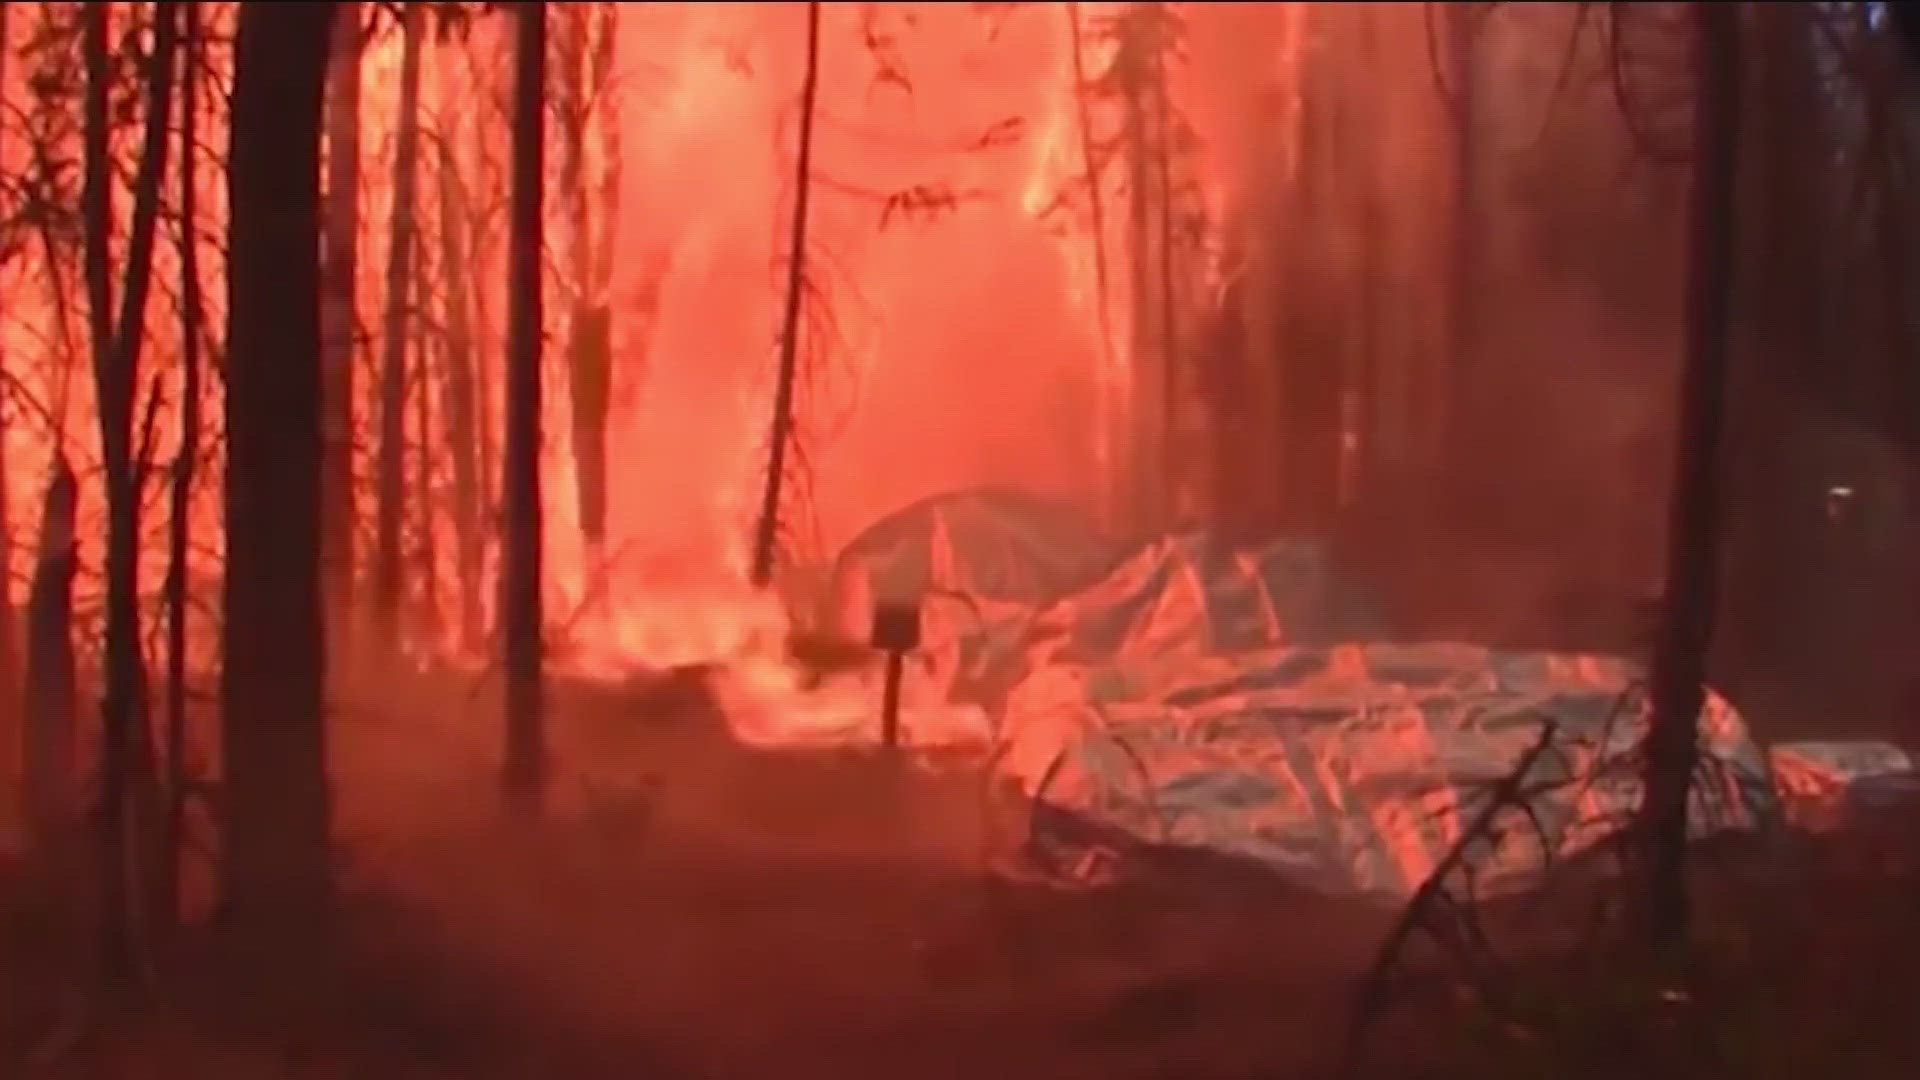 The current shelter, carried by all wildland firefighters, was designed by the U.S. Forest Service in 2002.